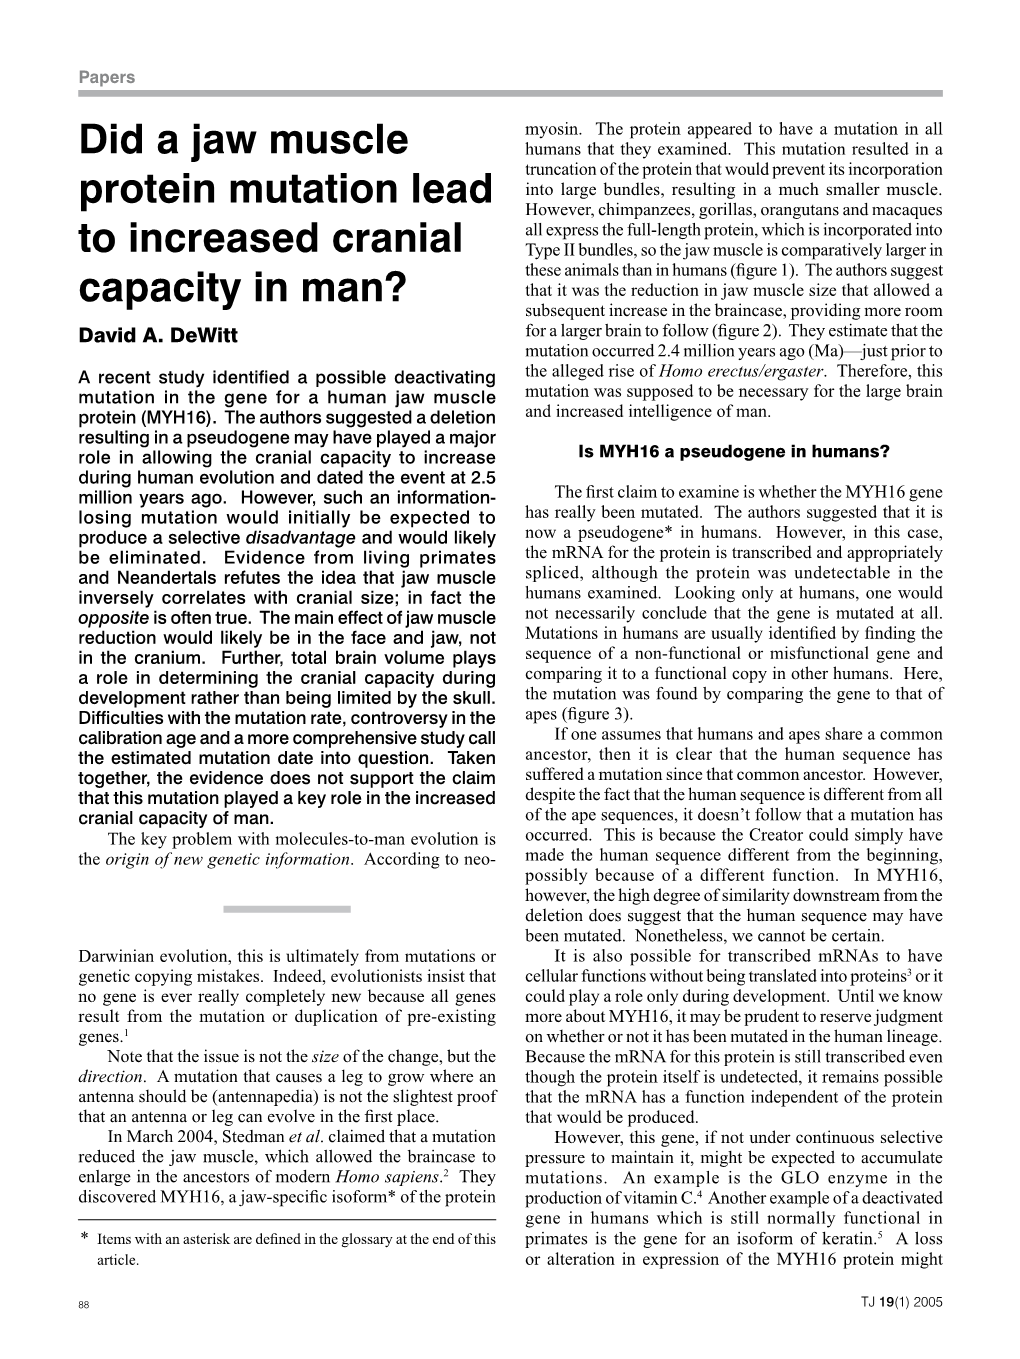 Did a Jaw Muscle Protein Mutation Lead to Increased Cranial Capacity in Man? — Dewitt